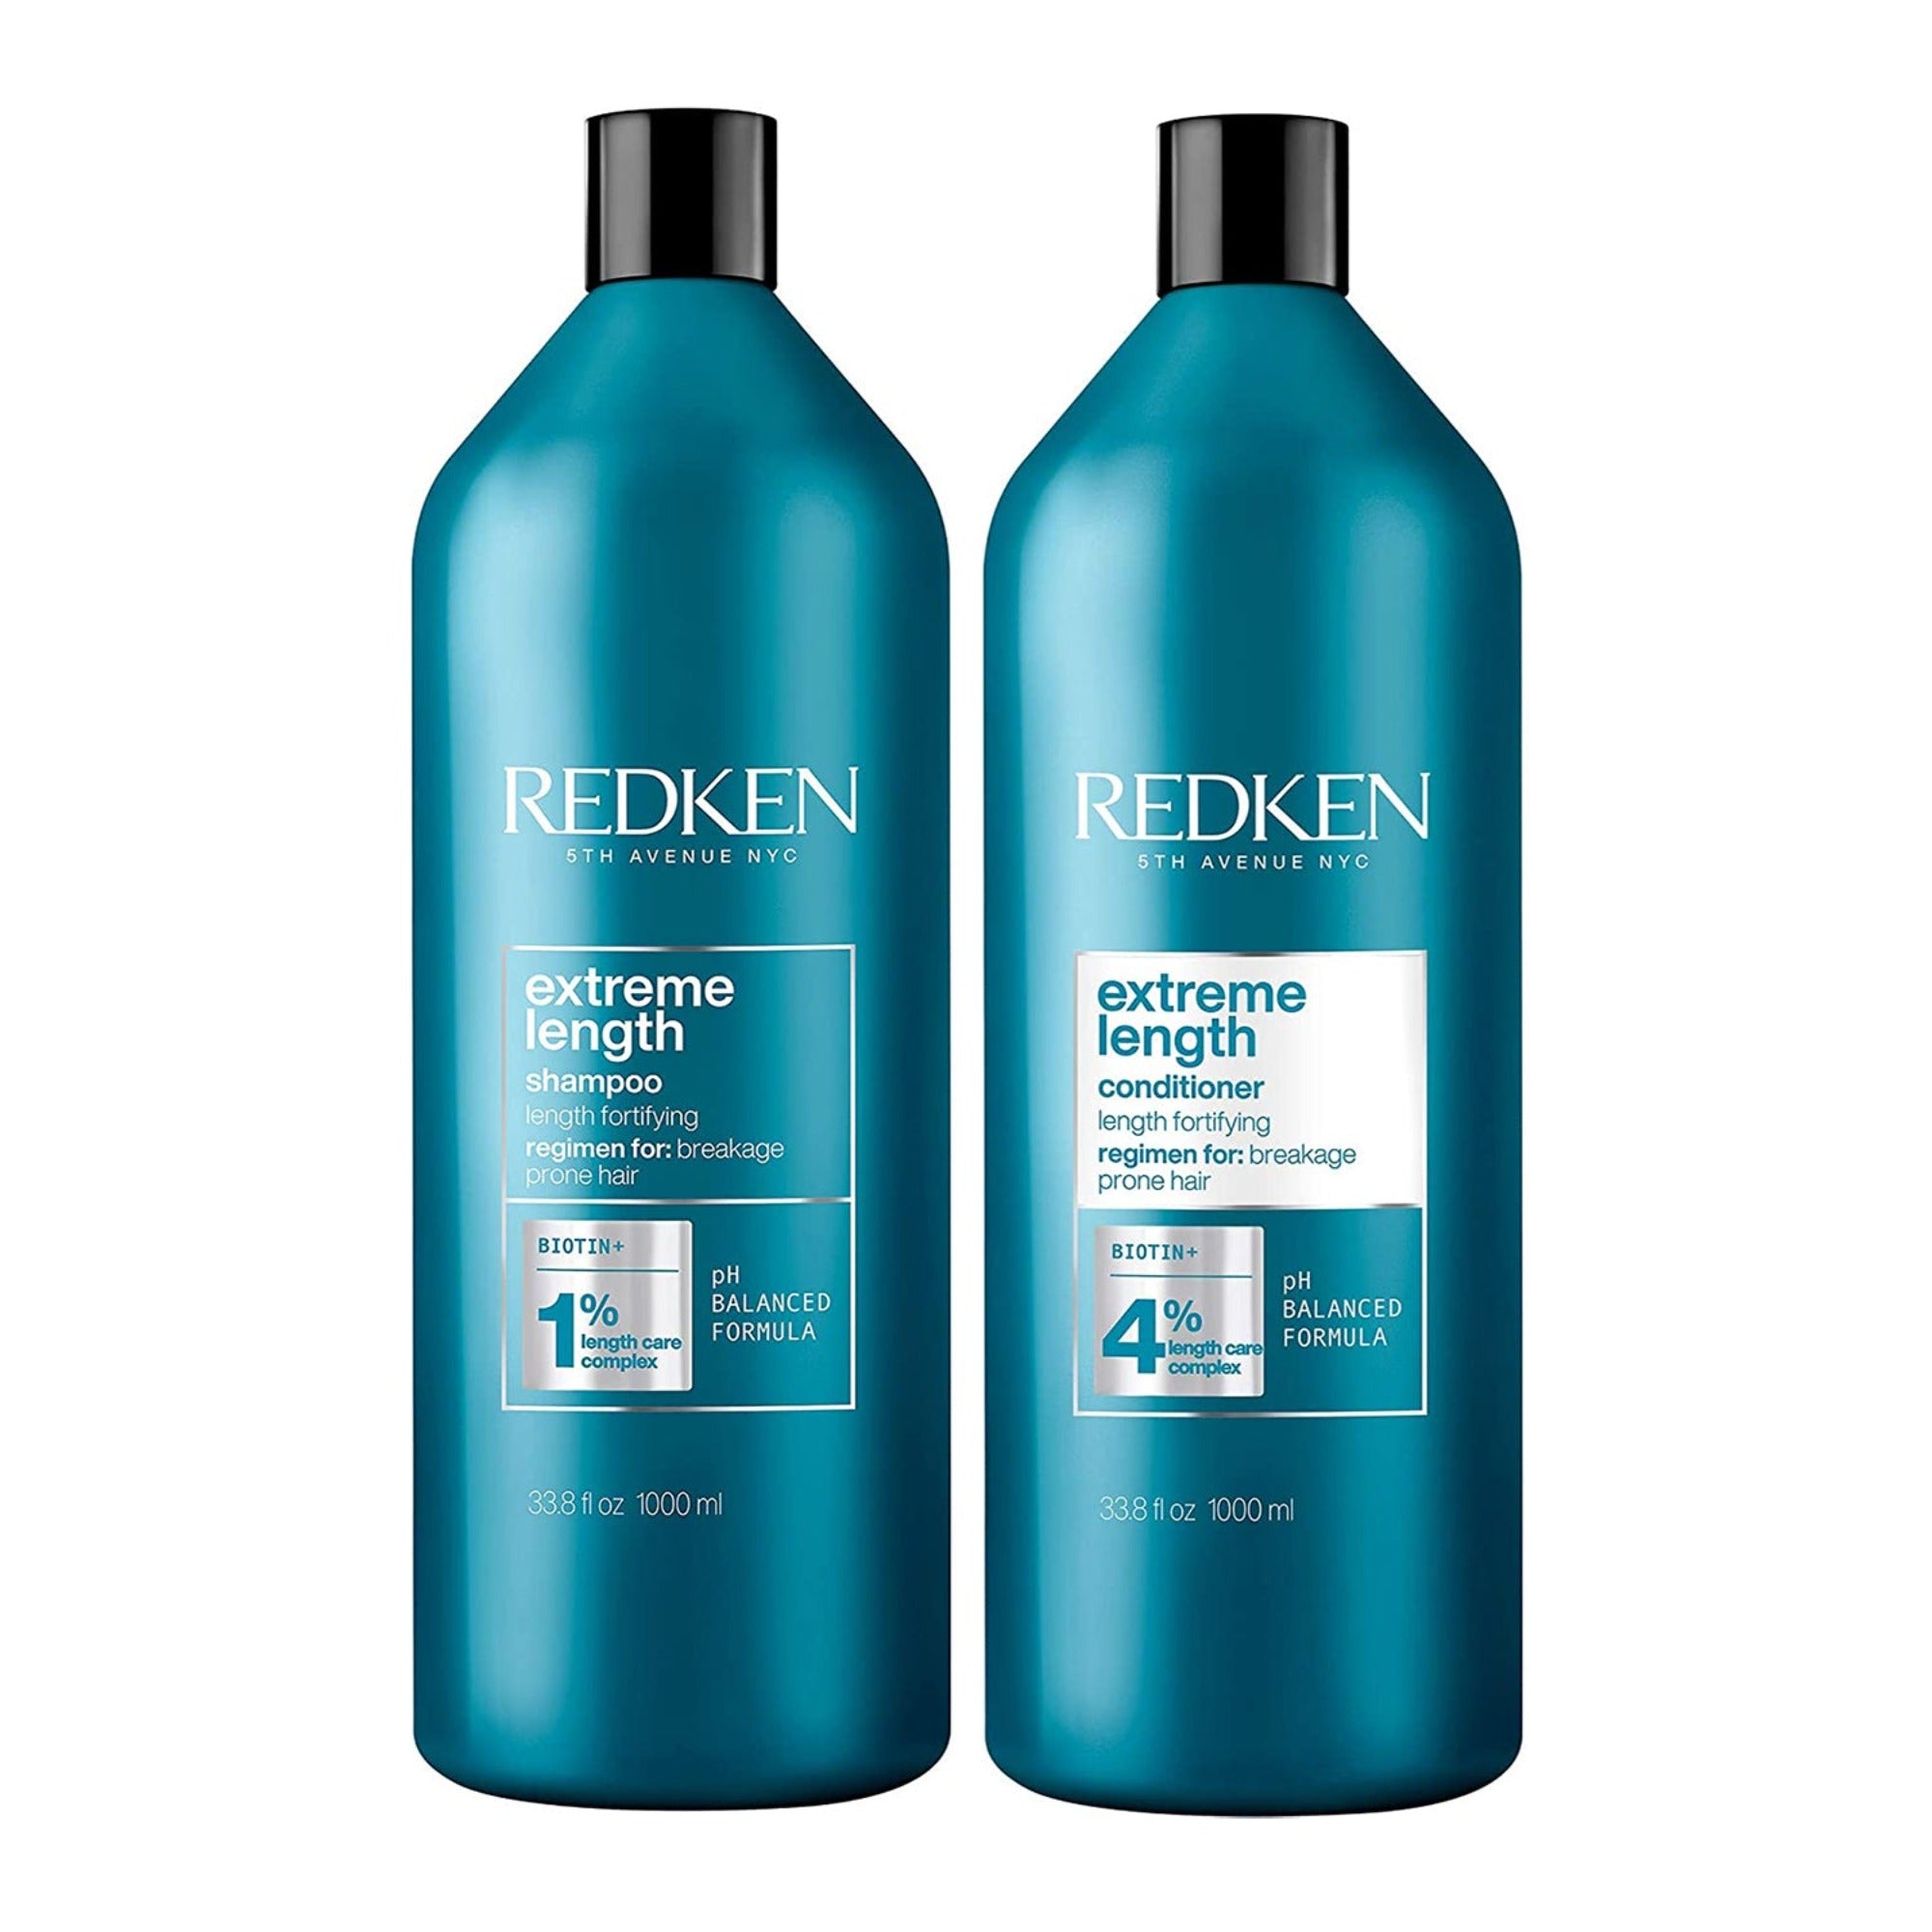 Redken Extreme Length with Biotin Shampoo & Conditioner Duo (Value $100) / DUO